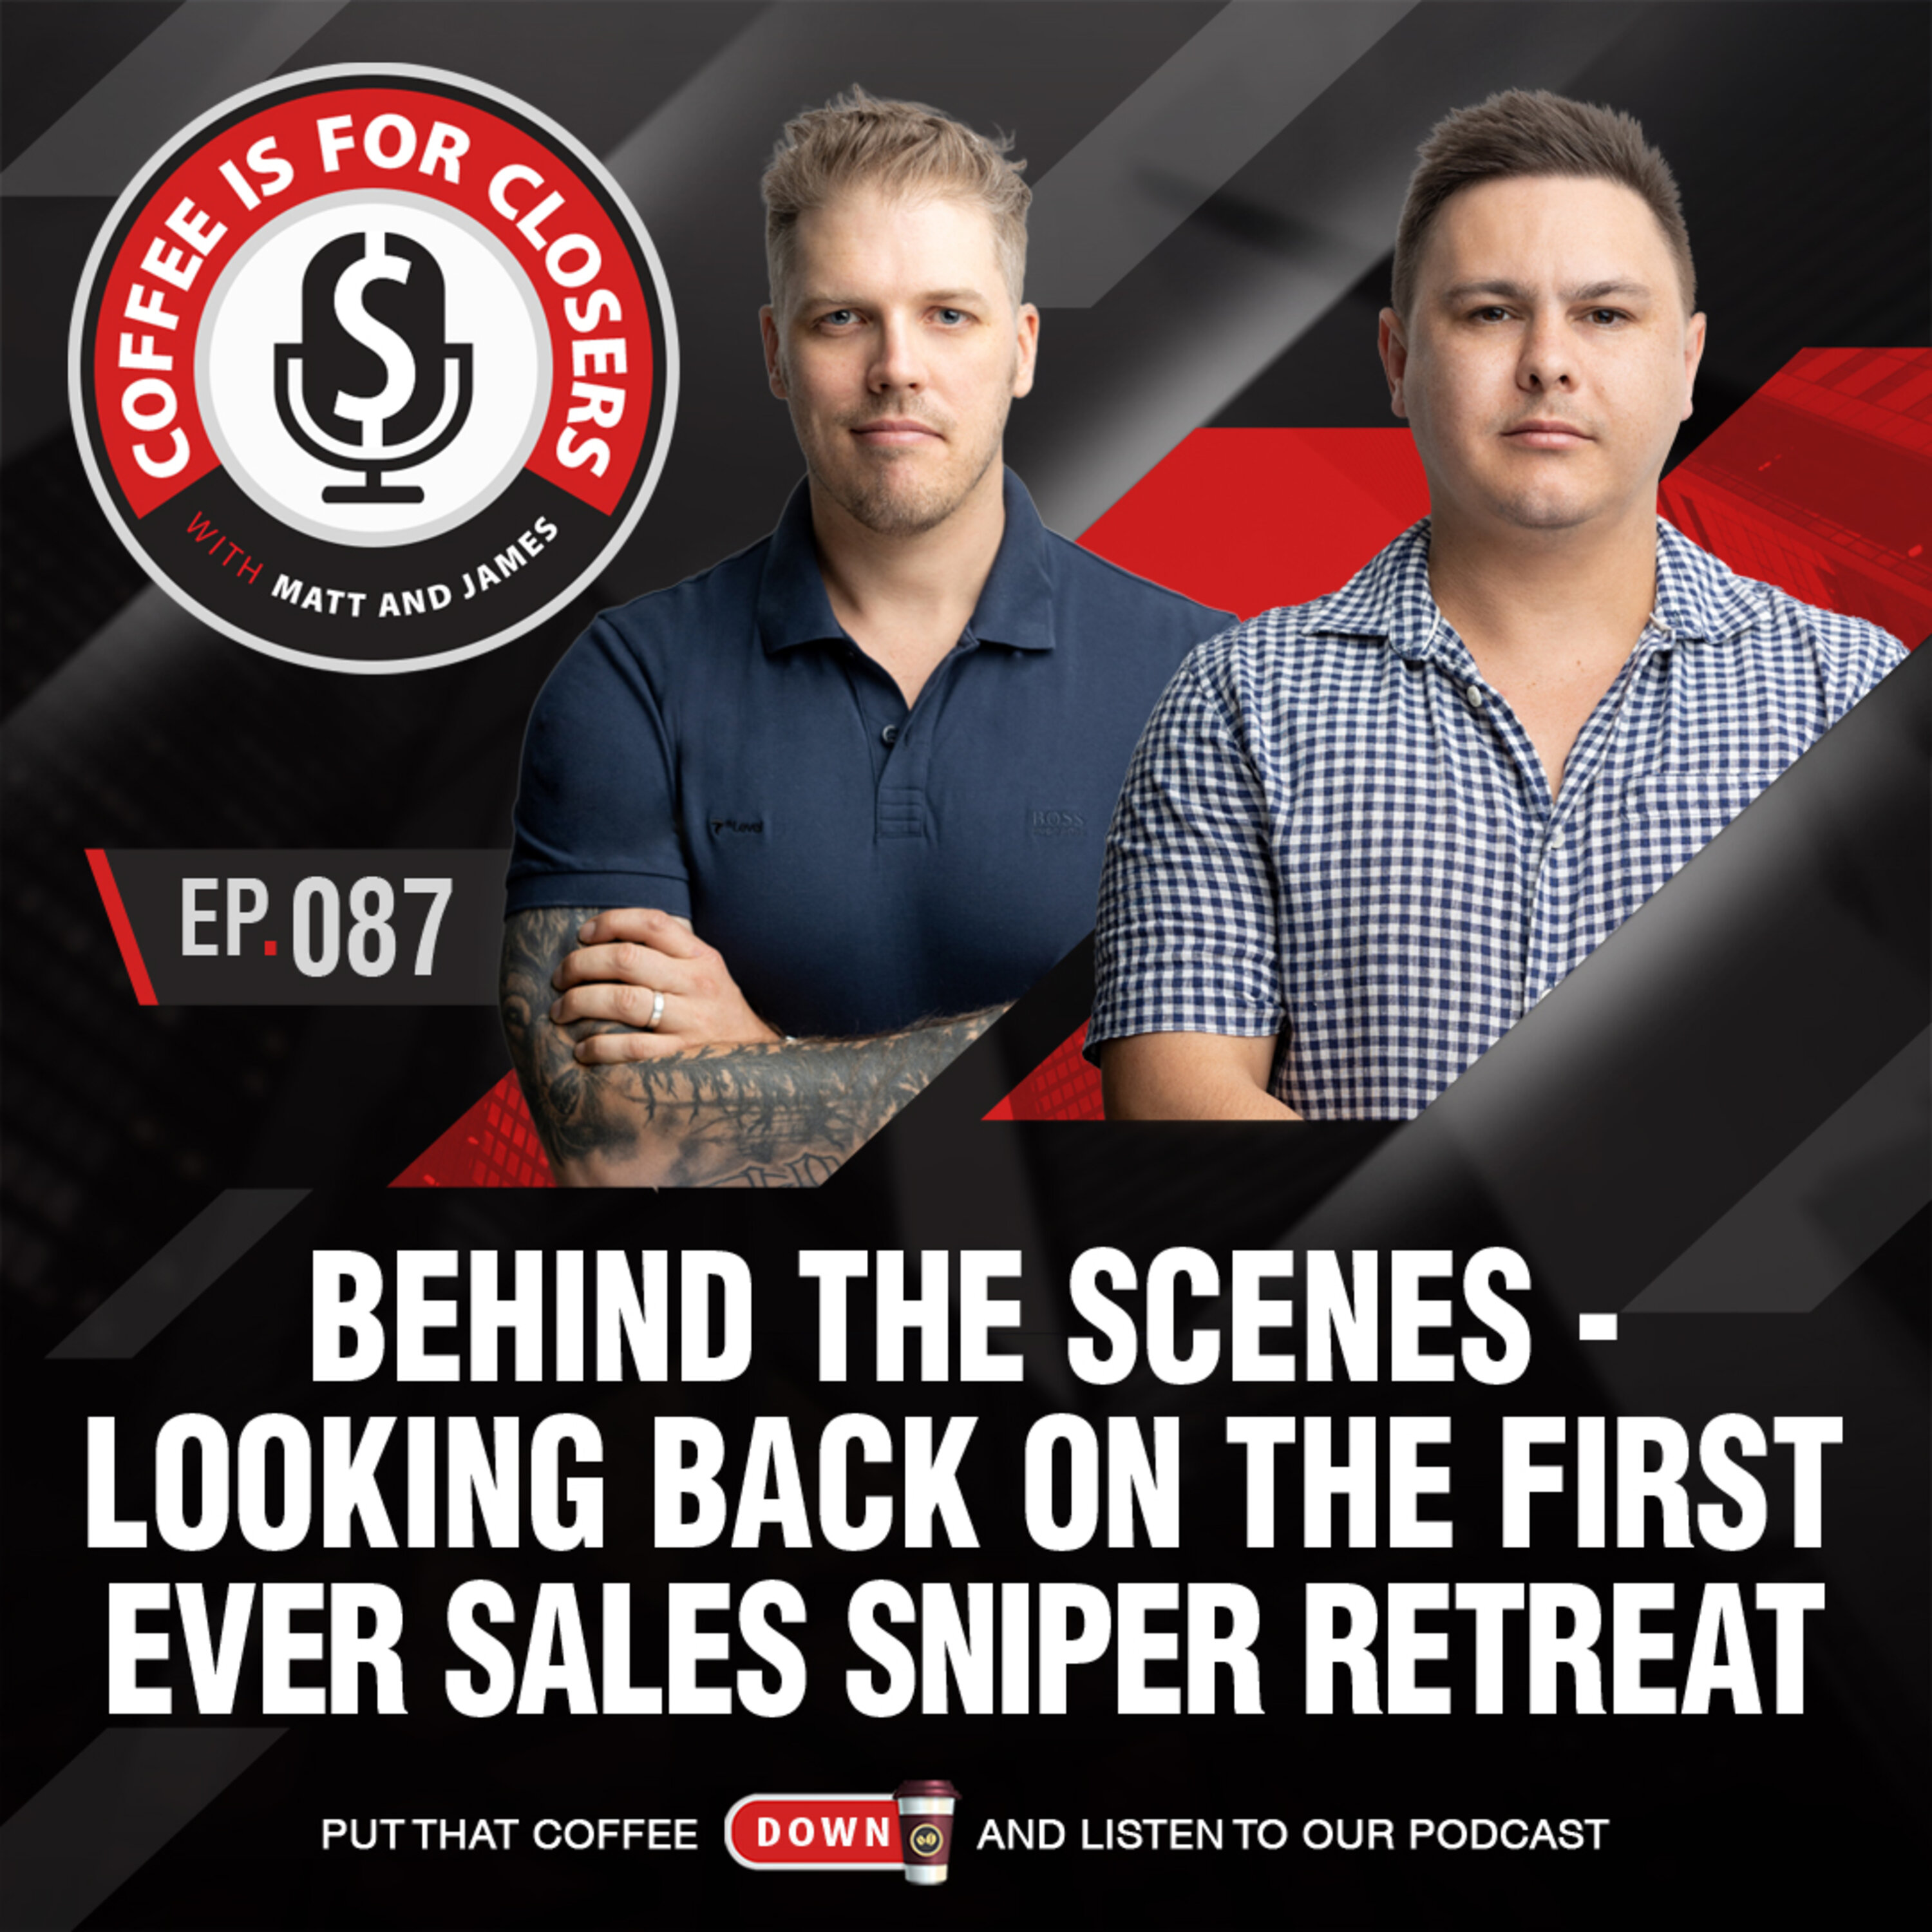 Behind the Scenes - Looking Back on the First Ever Sales Sniper Retreat